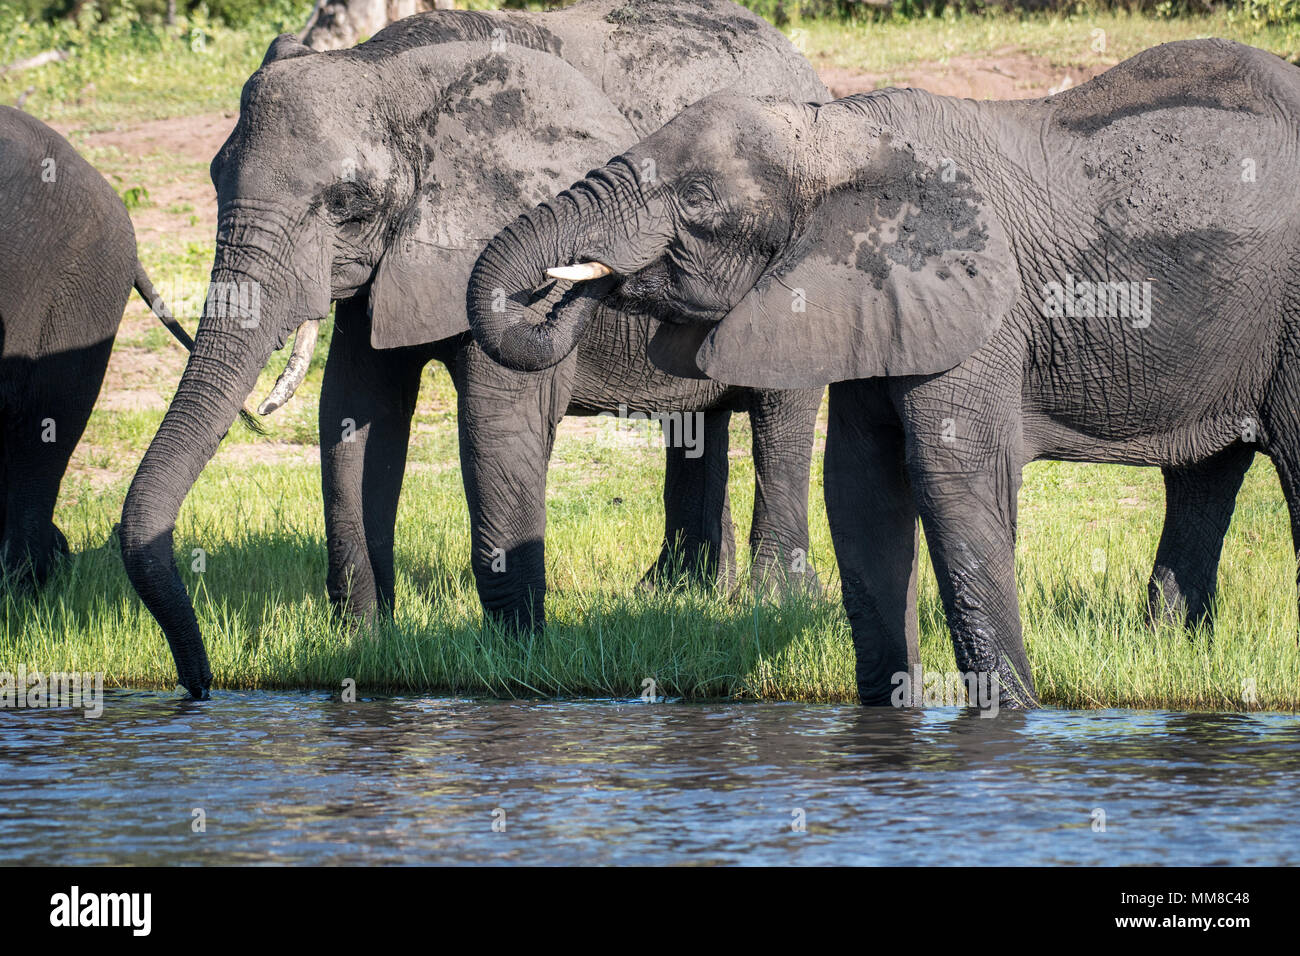 A group of elephants use their long trunks to take a drink from the Chobe River. Chobe National Park - Botswana Stock Photo